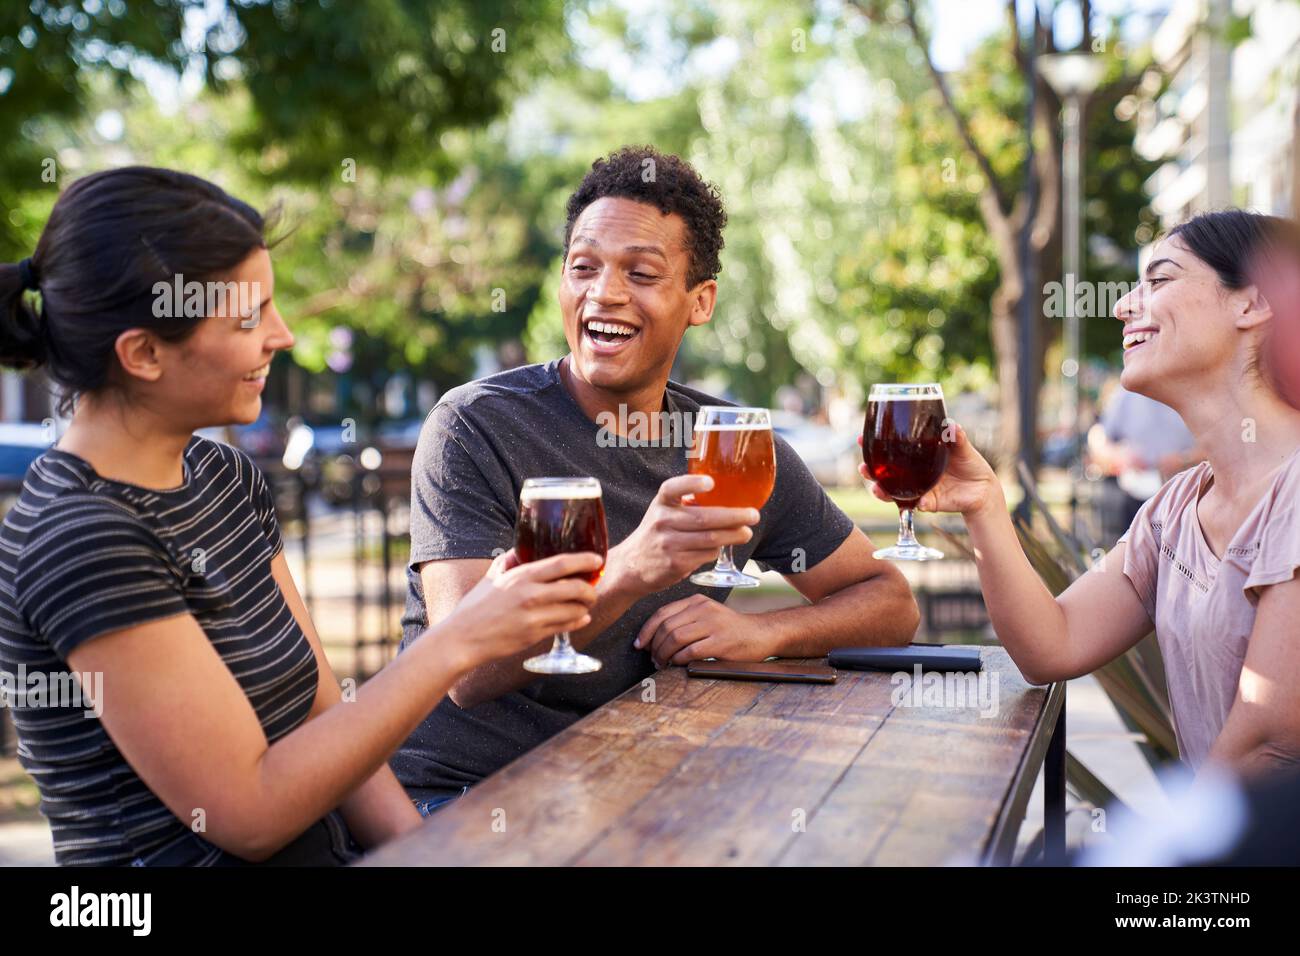 Mid-shot photo three young diverse friends raising their beers to make a toast at happy hour Stock Photo